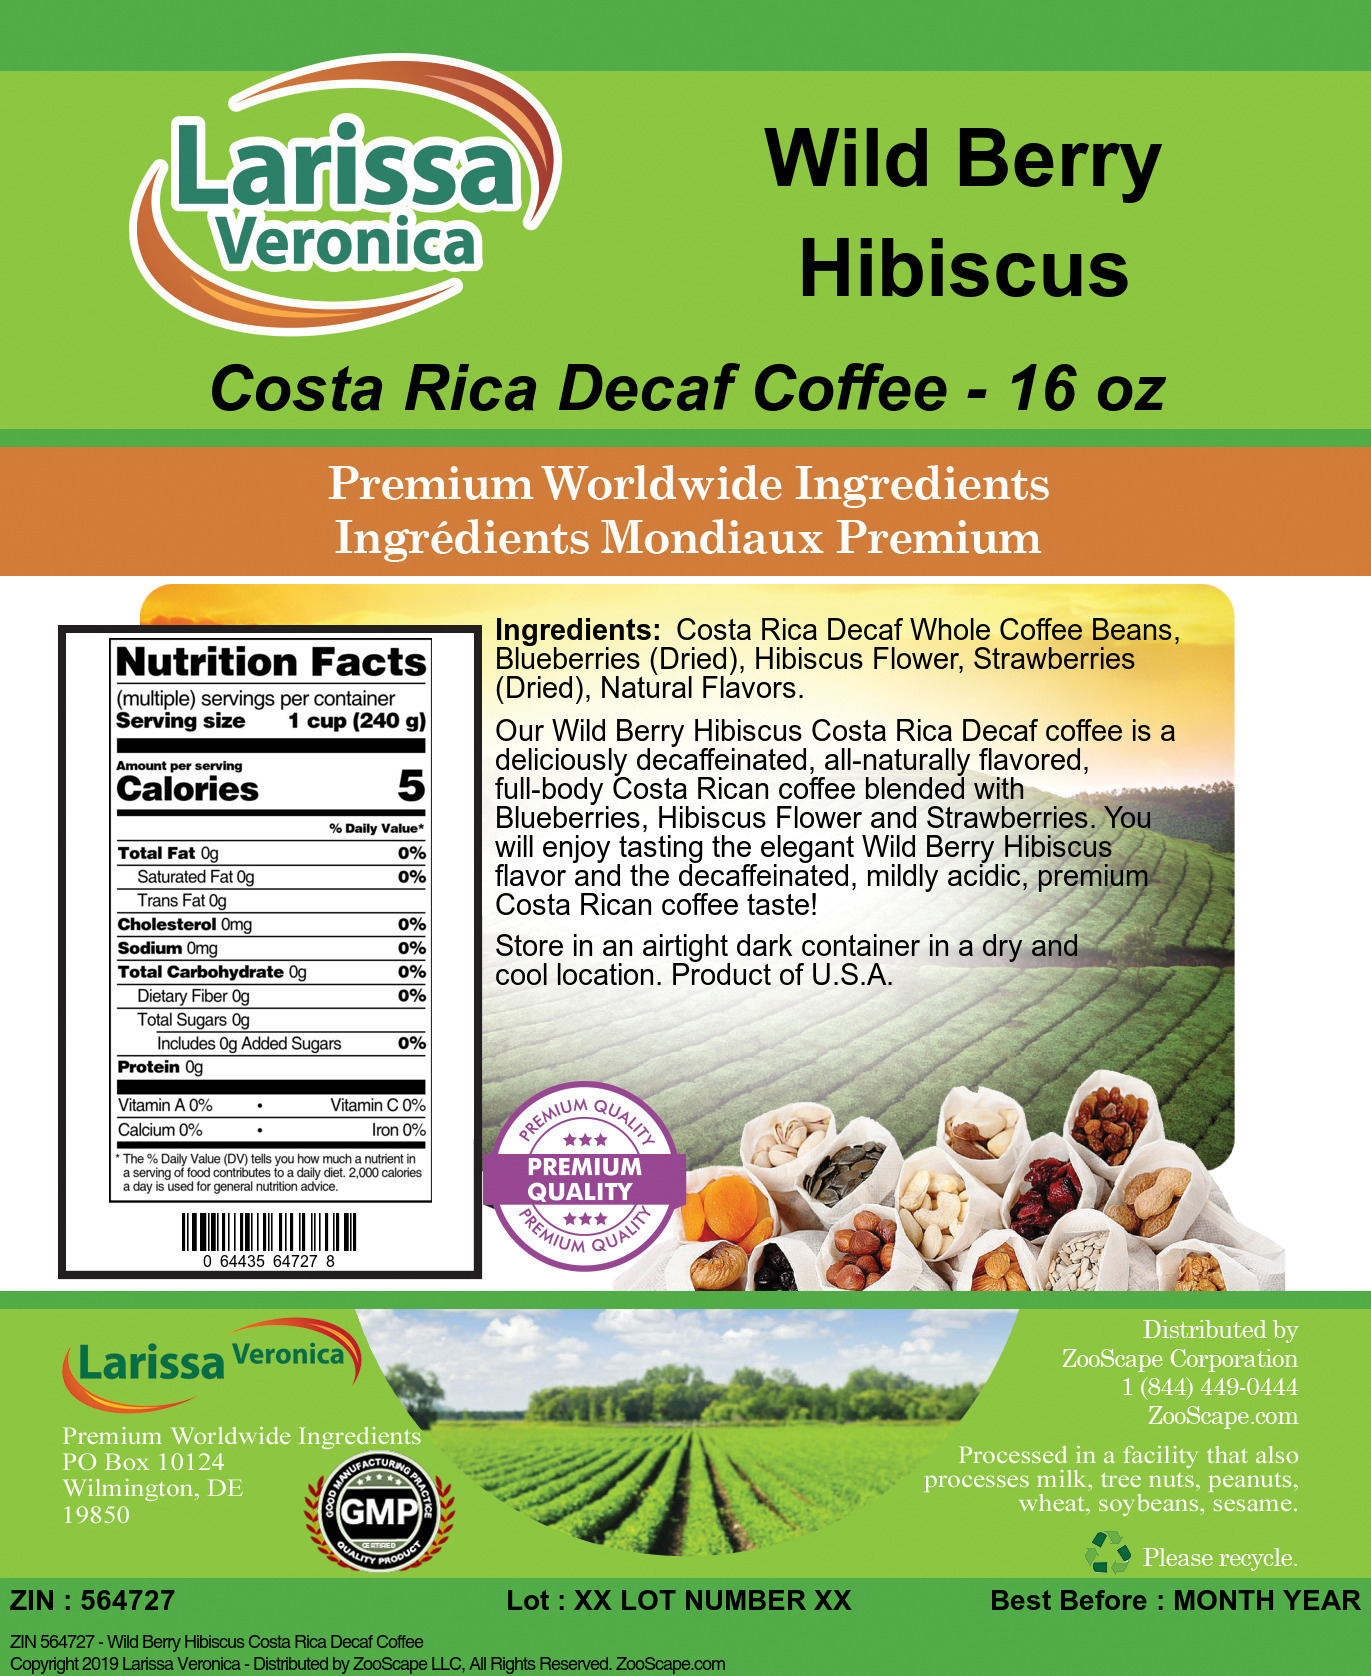 Wild Berry Hibiscus Costa Rica Decaf Coffee - Label